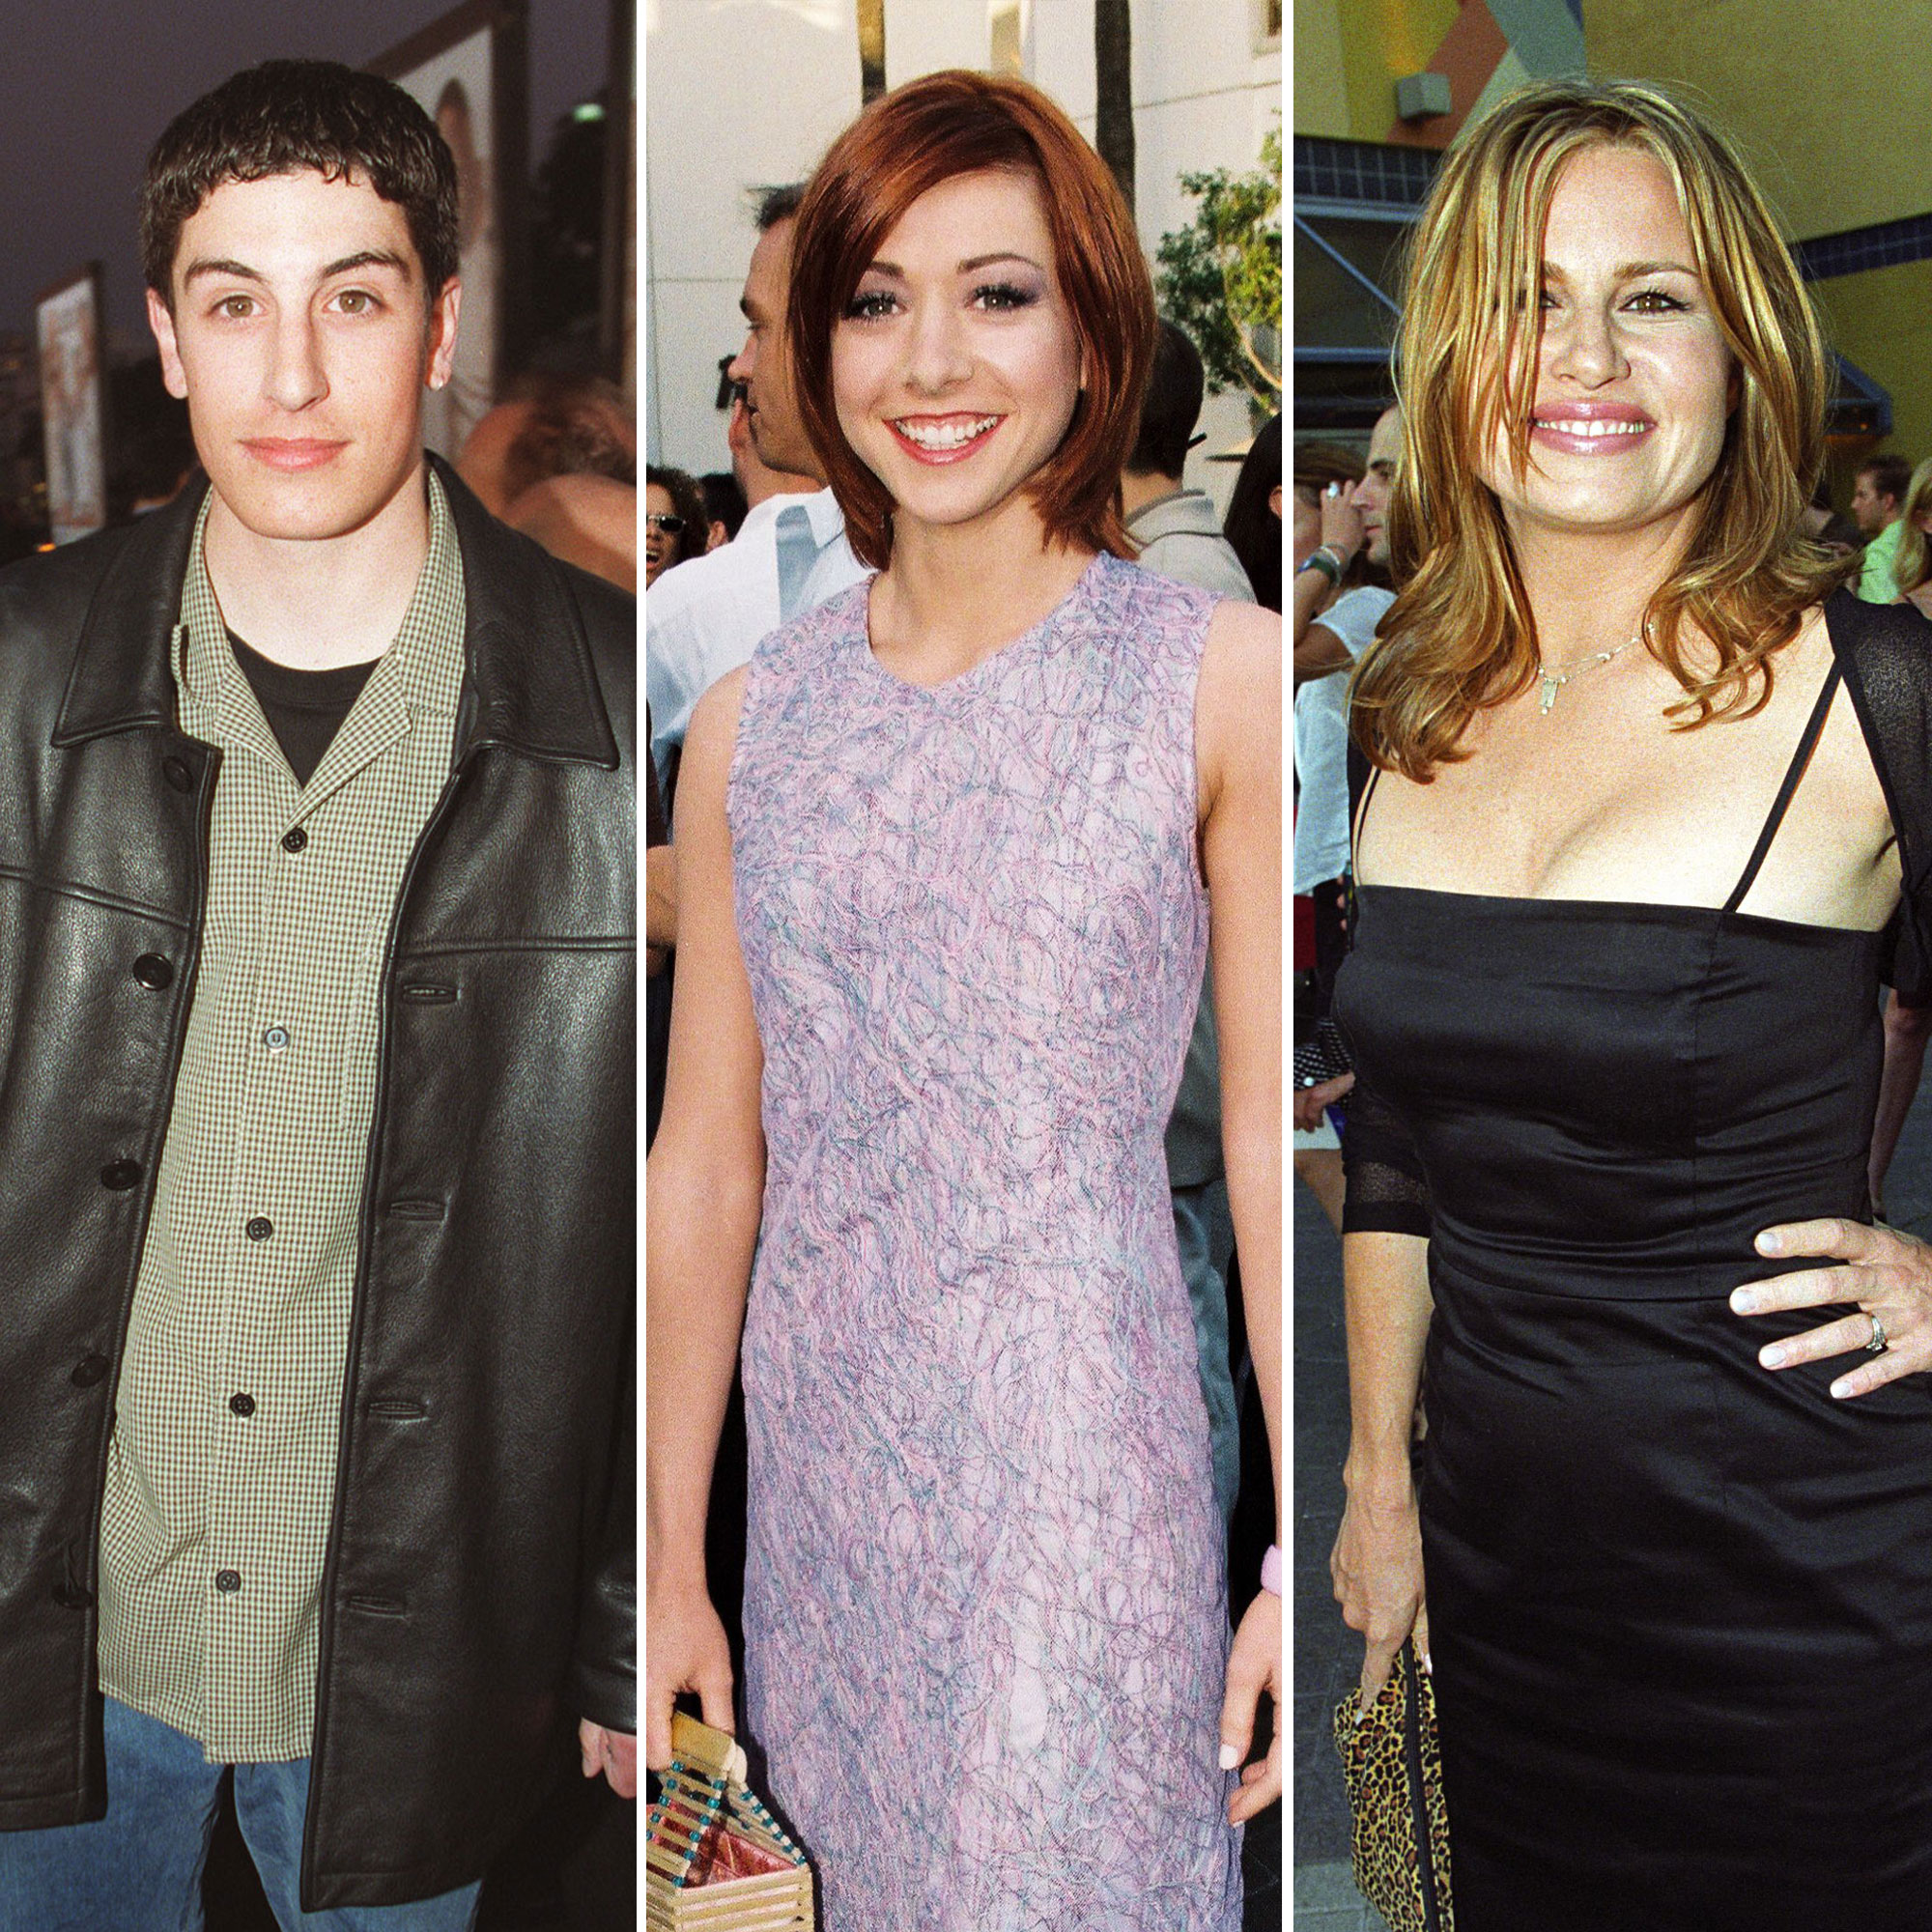 American Pie Cast Where Are They Now? Jason Biggs and More image image